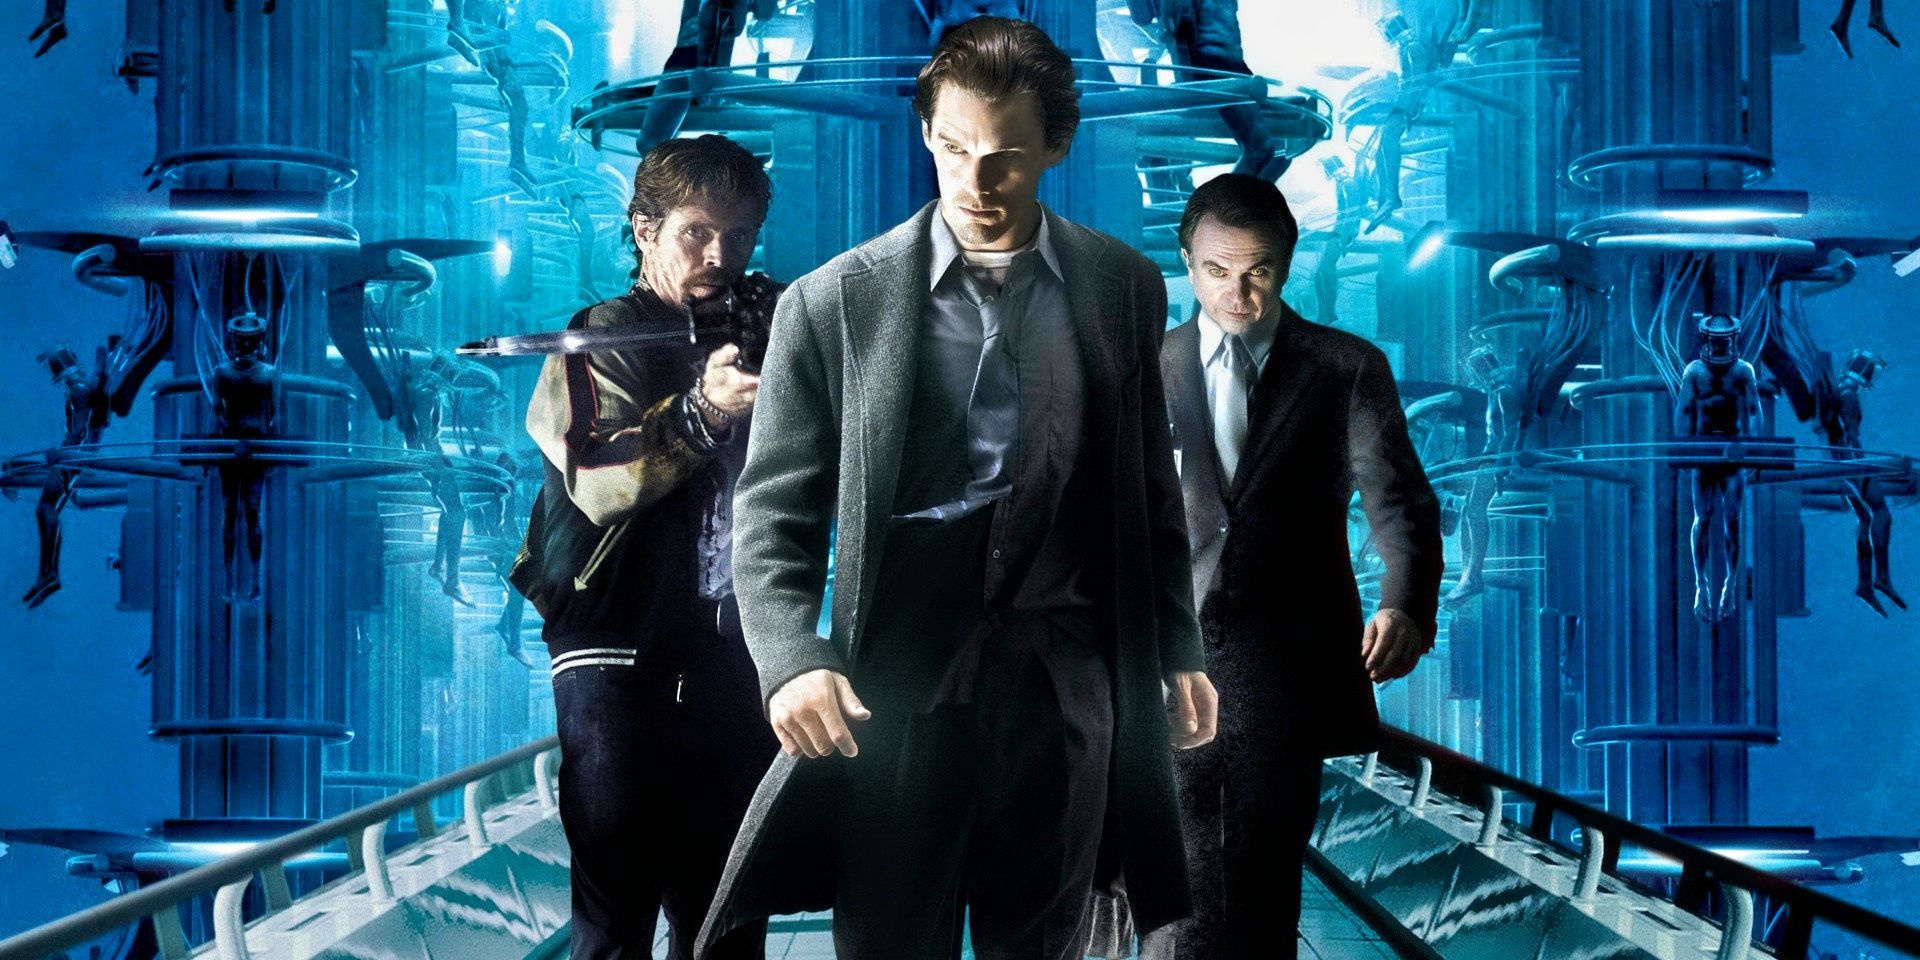 The poster for Daybreakers